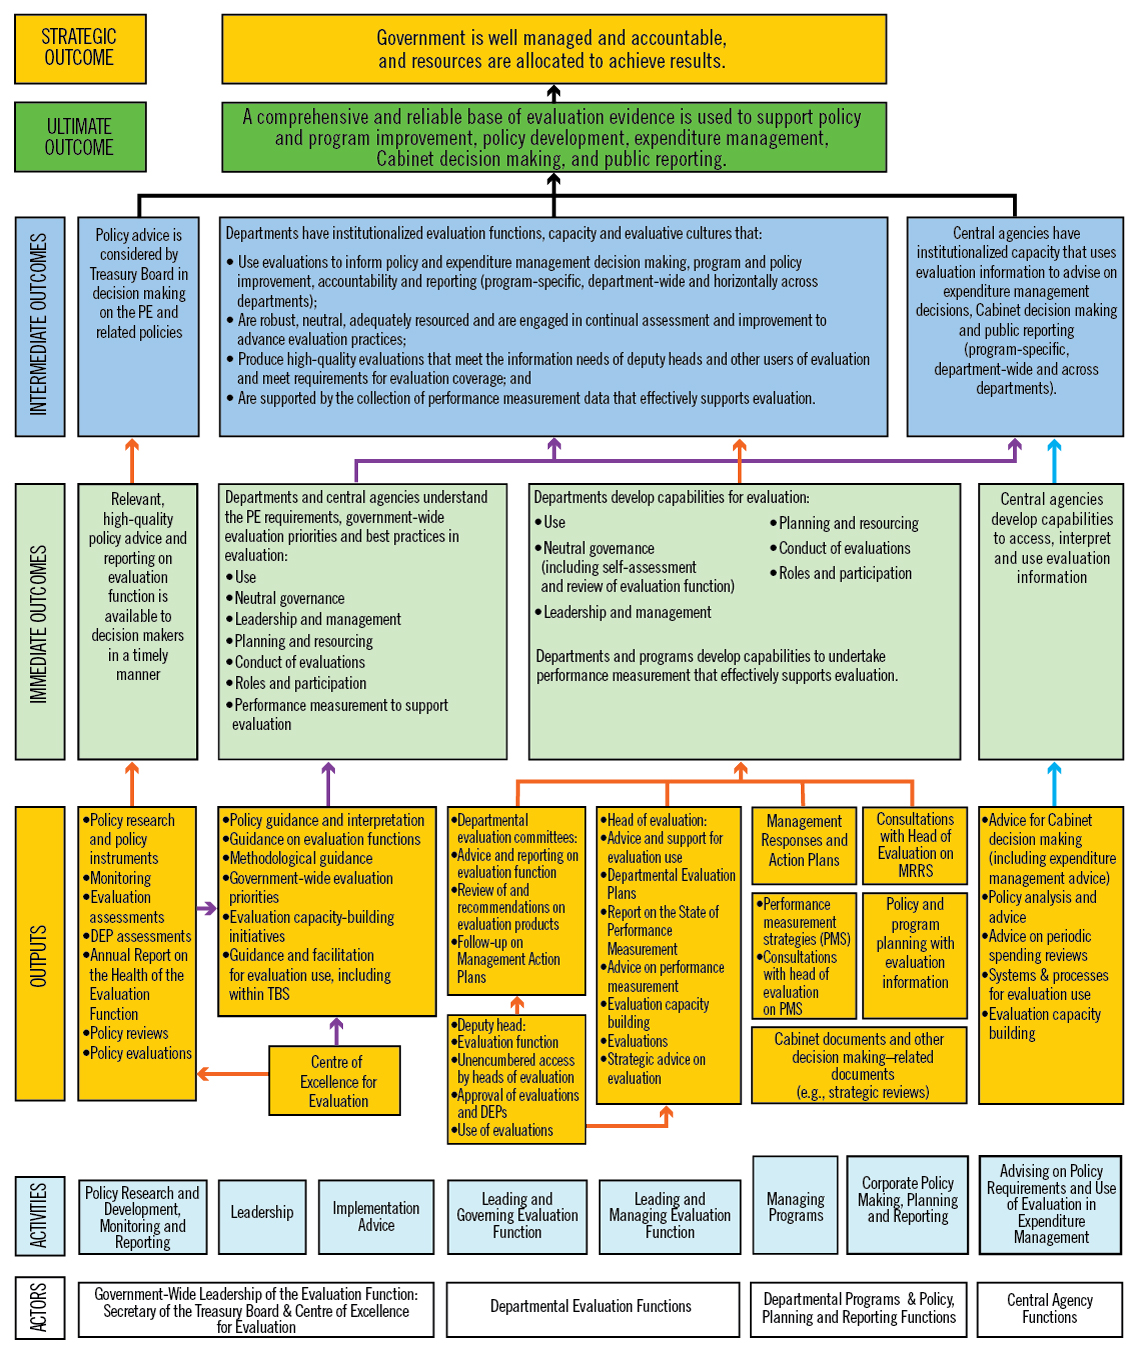 Logic Model for Implementing the 2009 Policy on Evaluation